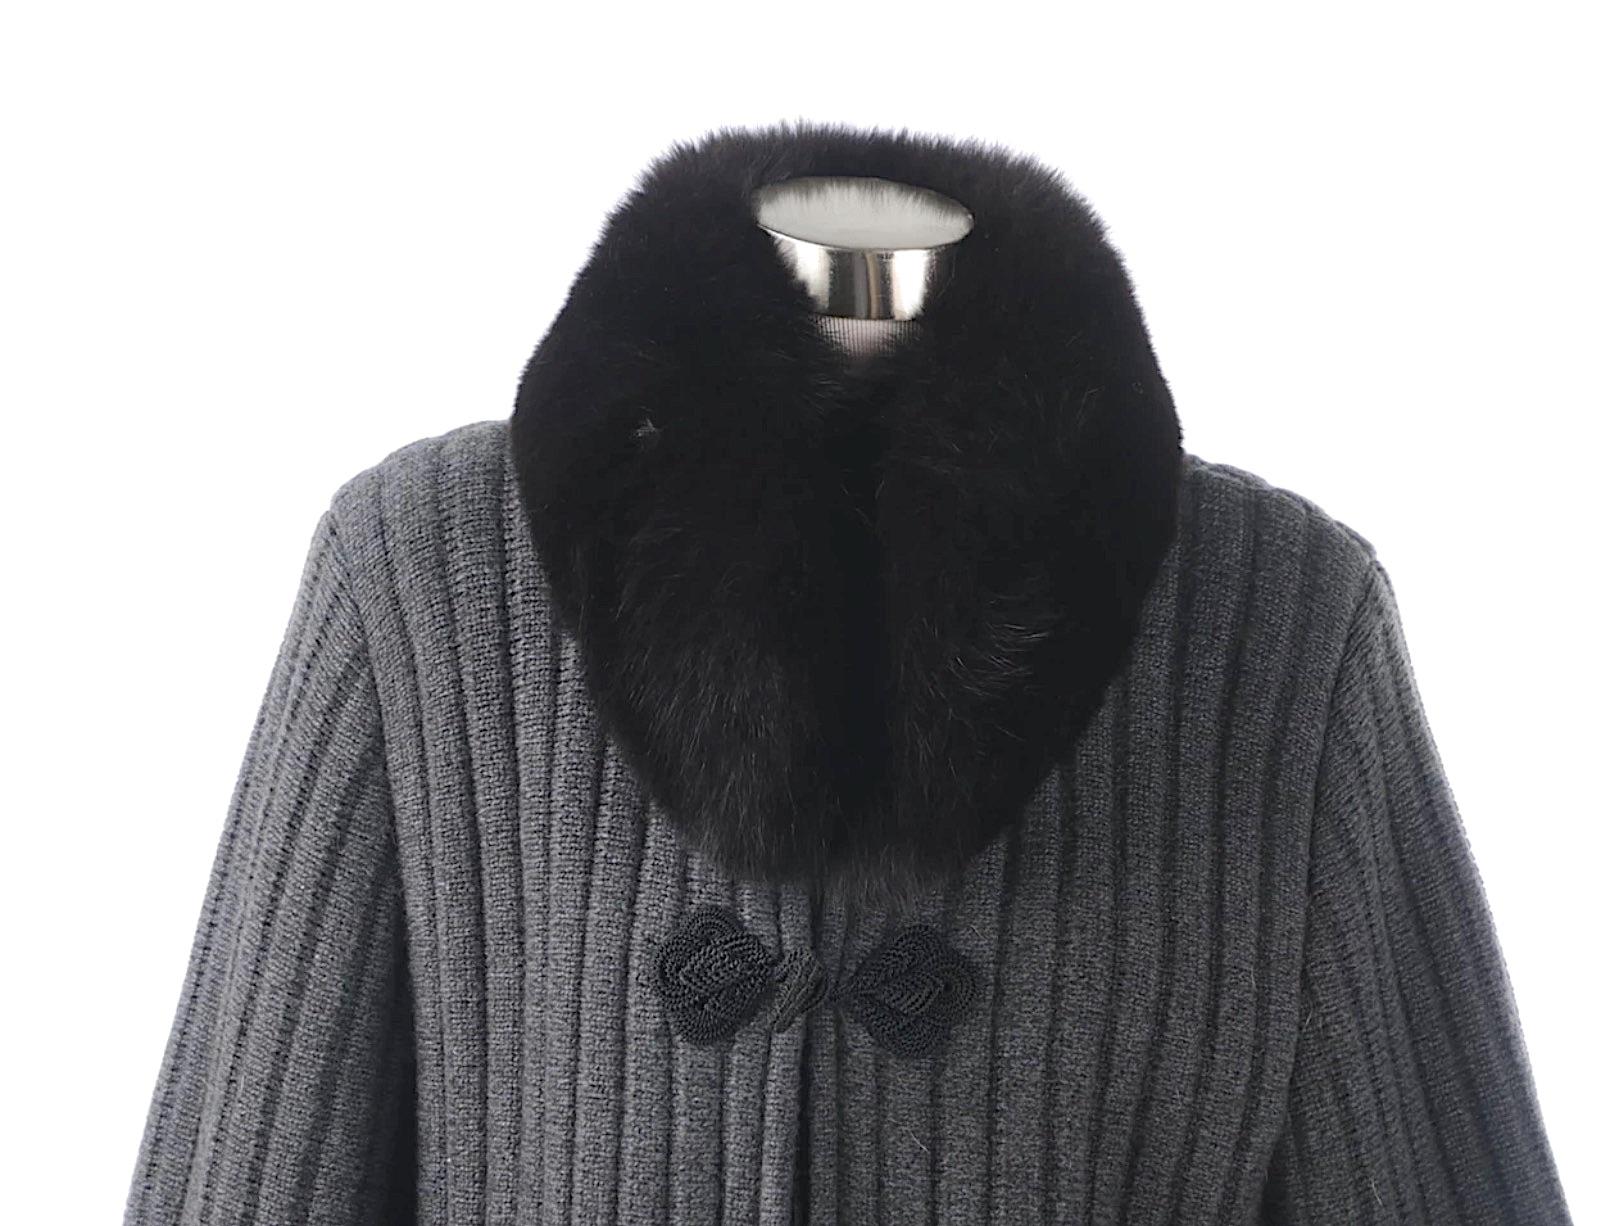 This is the ultimate Haute Couture Valentino Fur Sweater Jacket for a Stylish Fashionista!
Gorgeous Valentino Lush Black Fox Fur trimmed around the Collar, Sleeves and Bottom with a Grey Ribbed Wool Knit Sweater Jacket. 
From the Valentino Night